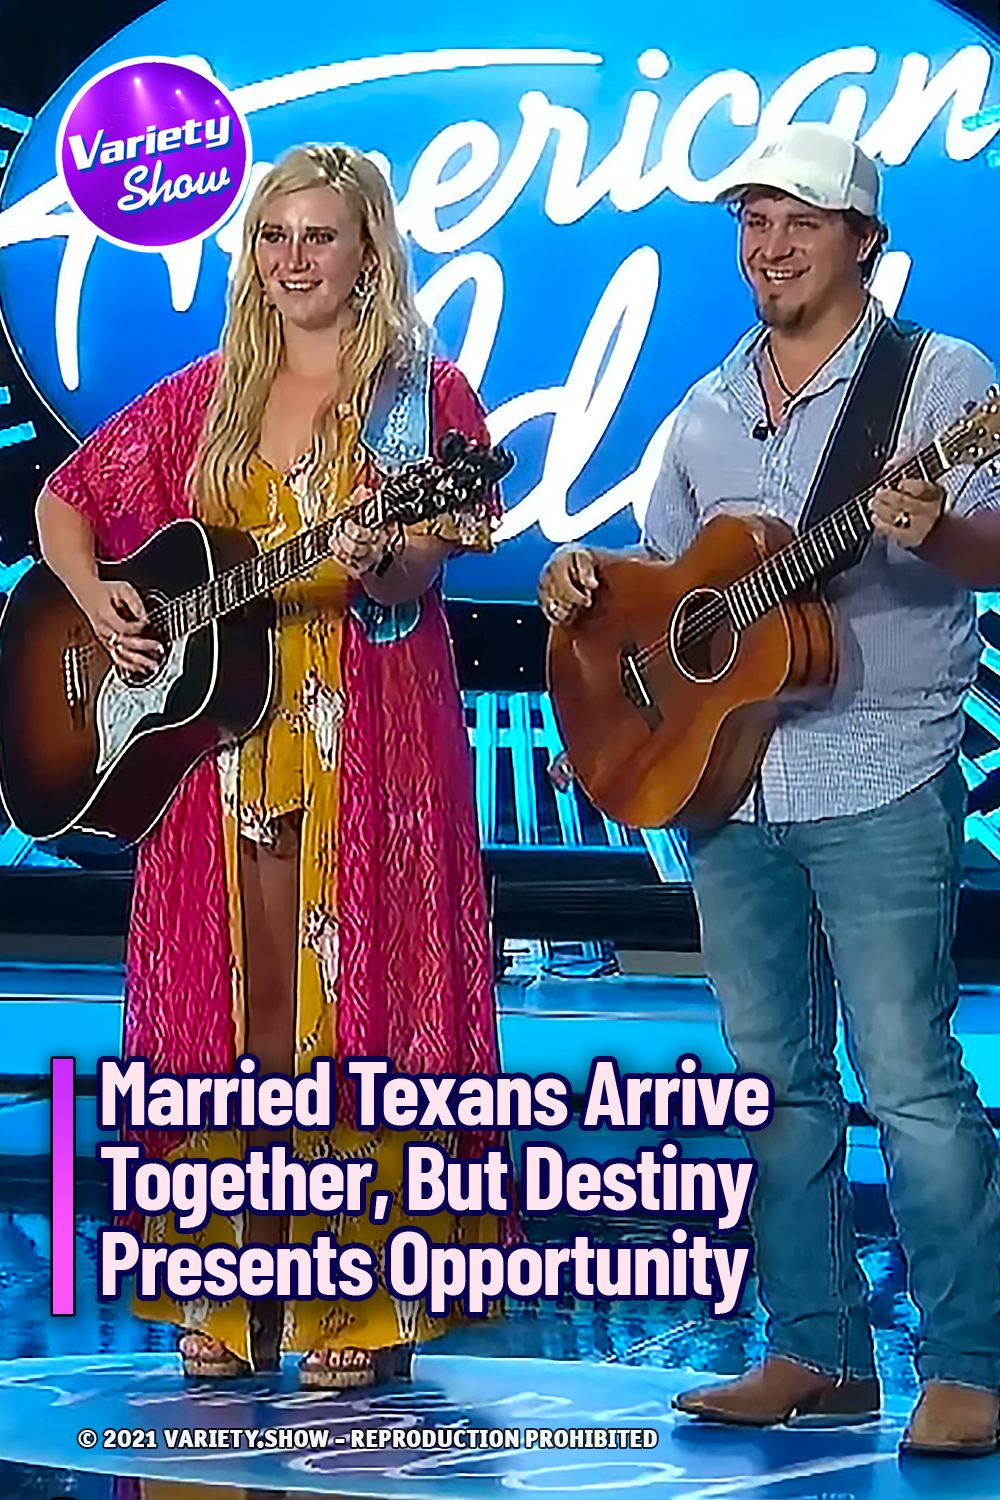 Married Texans Arrive Together, But Destiny Presents Opportunity